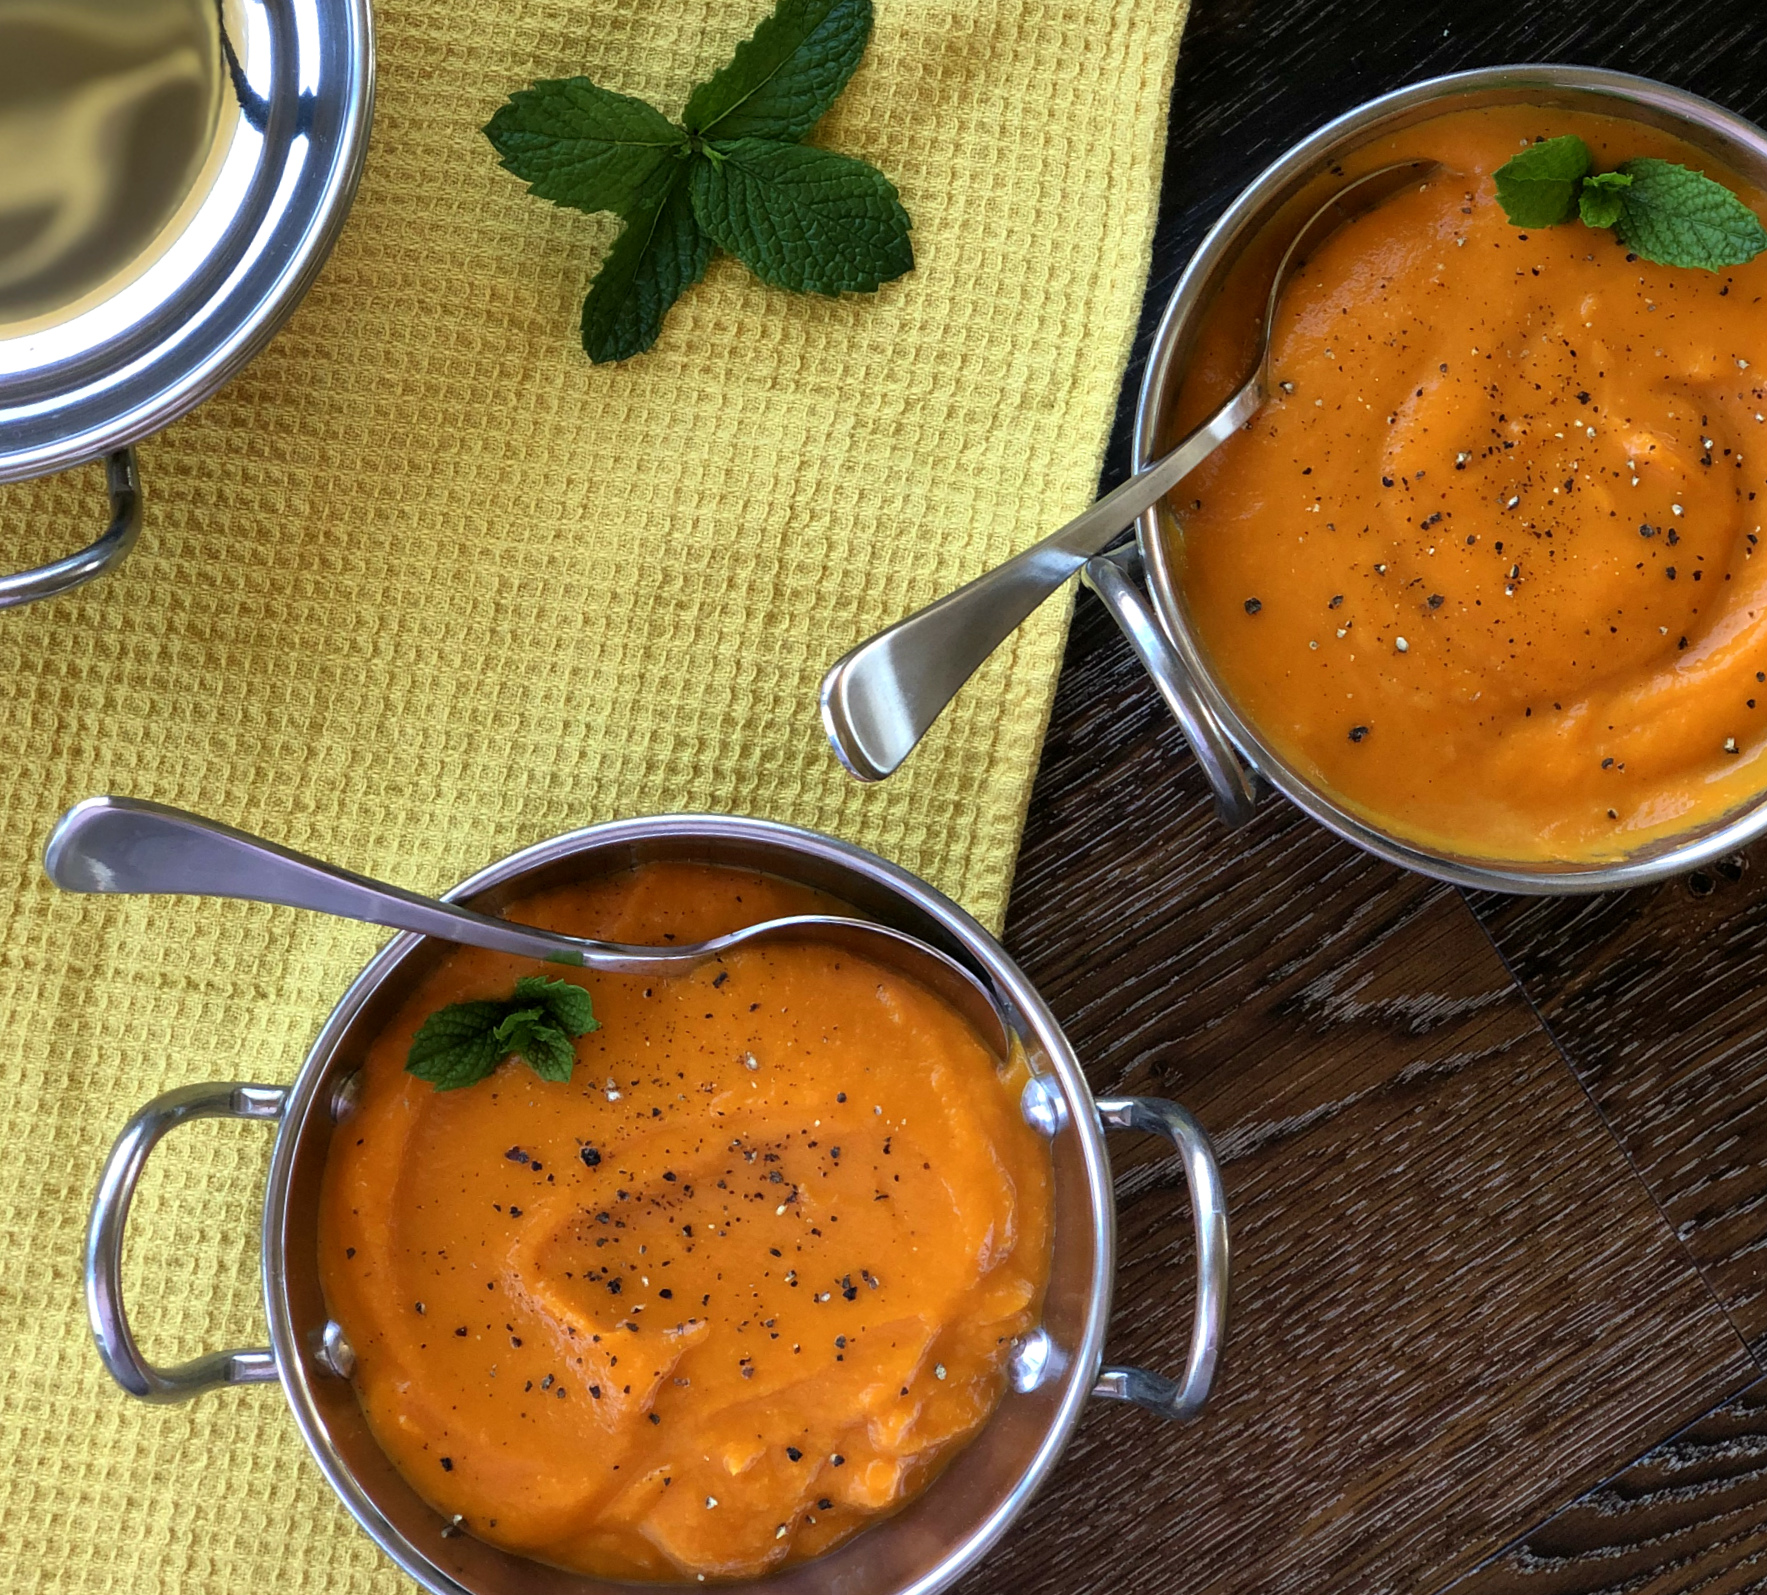 Carrot & Ginger Soup in two Bowls with cracked pepper to serve 